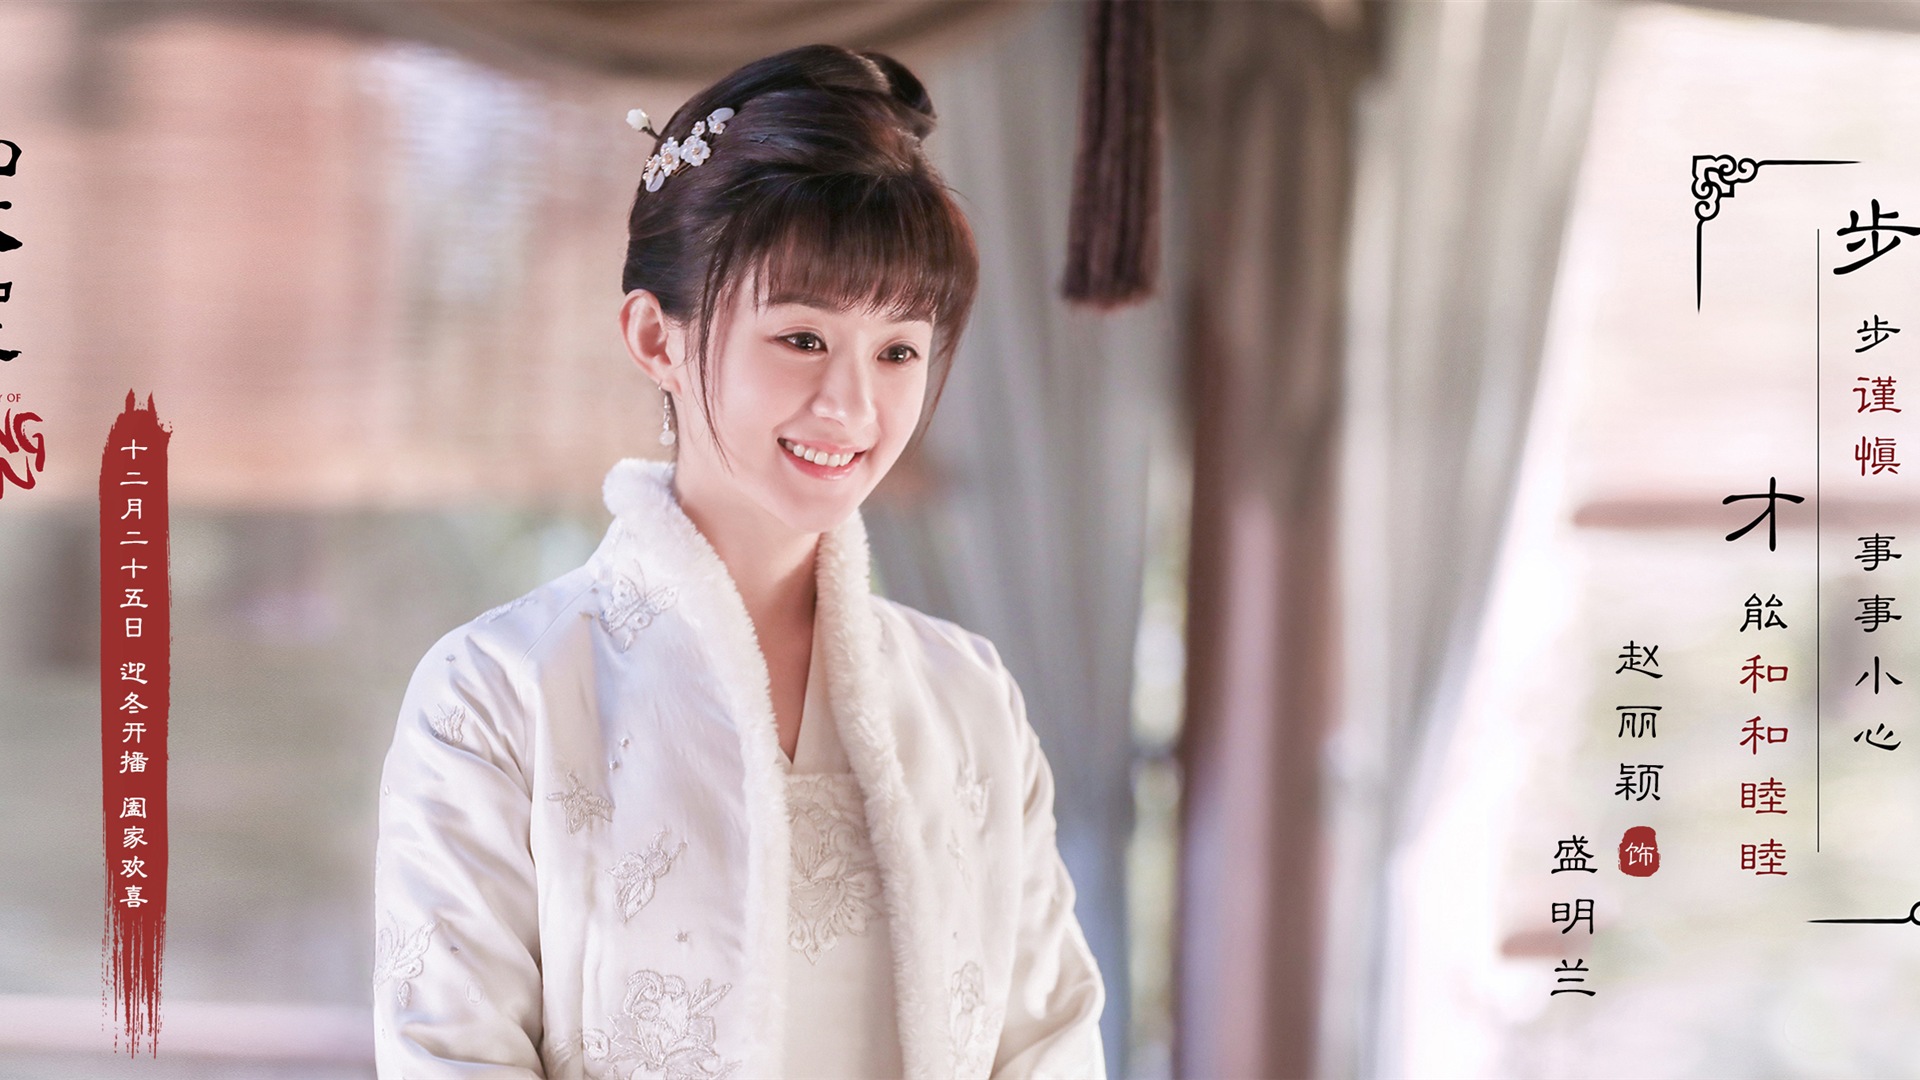 The Story Of MingLan, TV series HD wallpapers #28 - 1920x1080